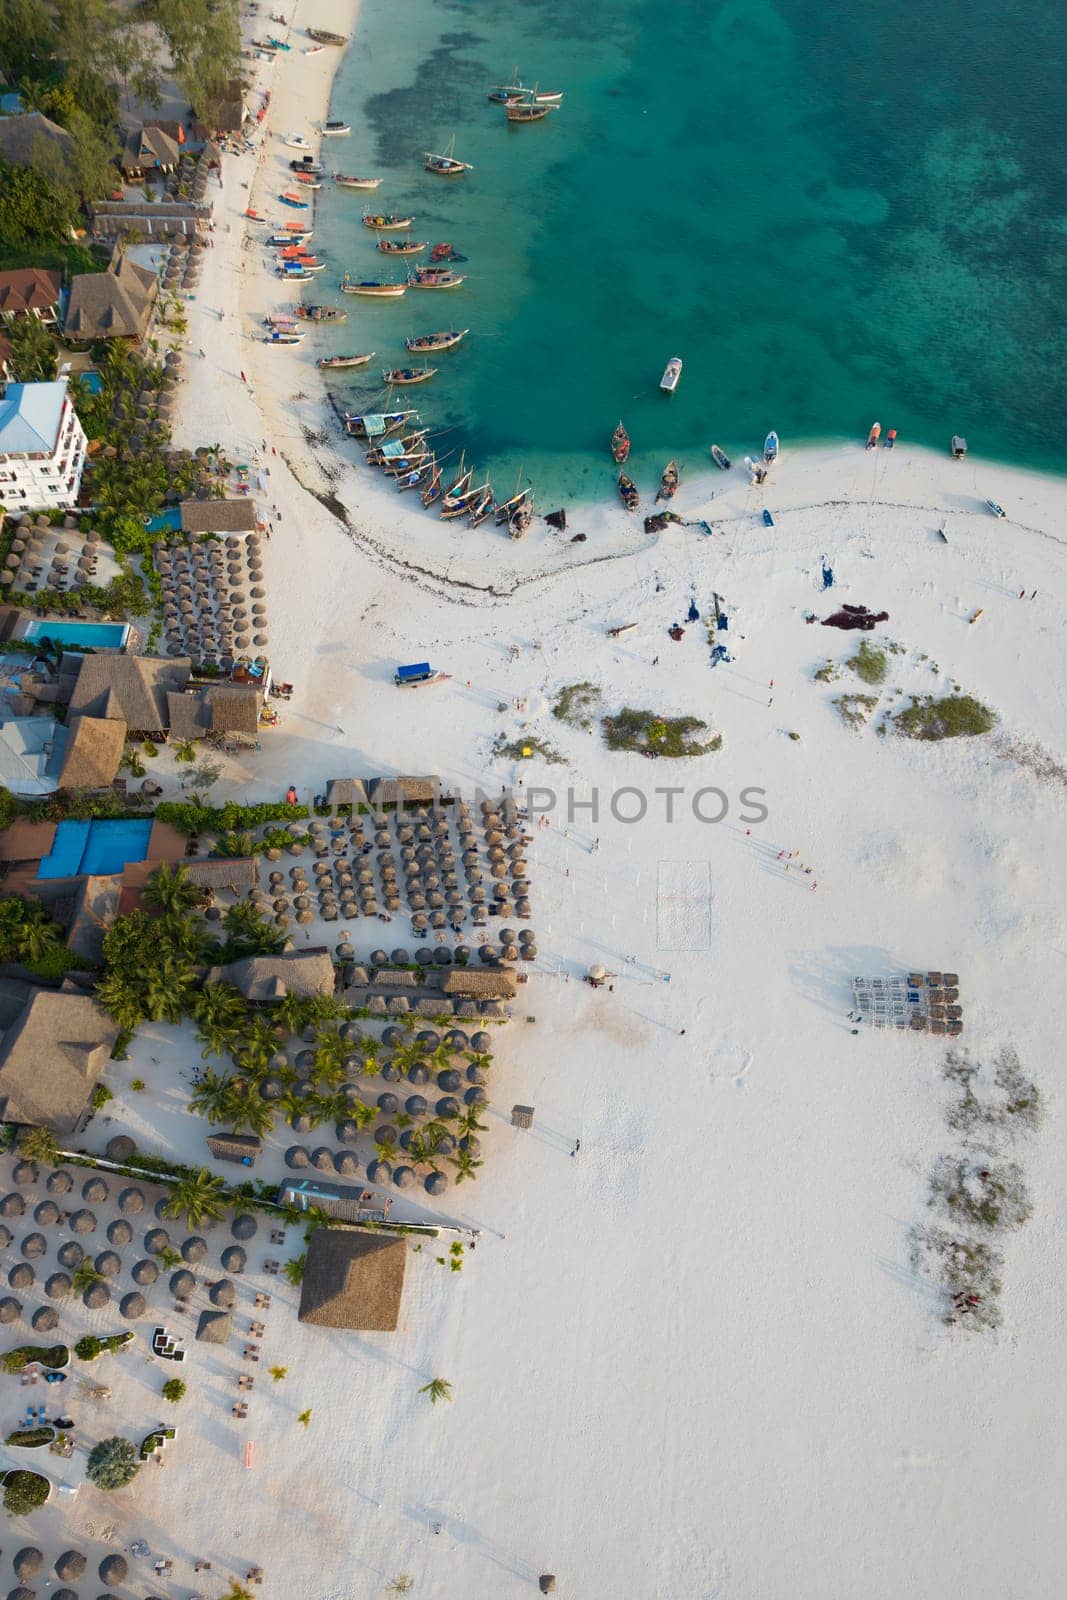 Aerial view of the fishing boats and umbrellas on tropical sea coast with sandy beach.Summer travel in Zanzibar, Africa.Top view of boats and clear green water.